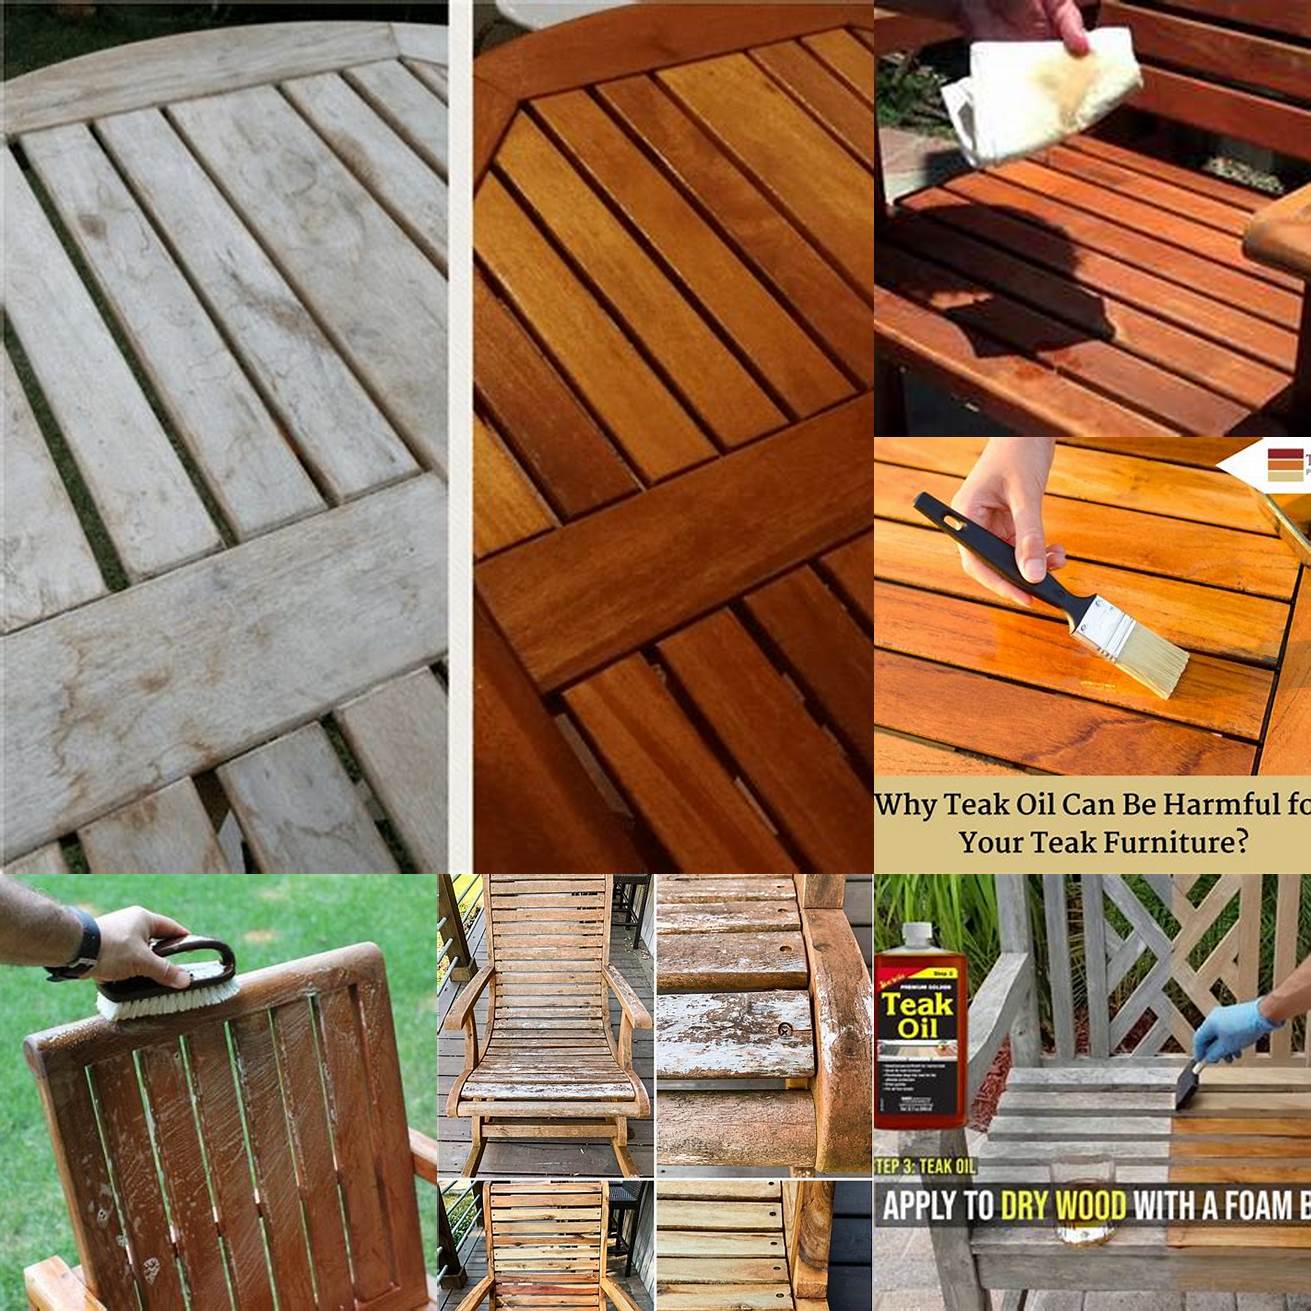 Photo of Teak furniture being treated with teak oil or sealant